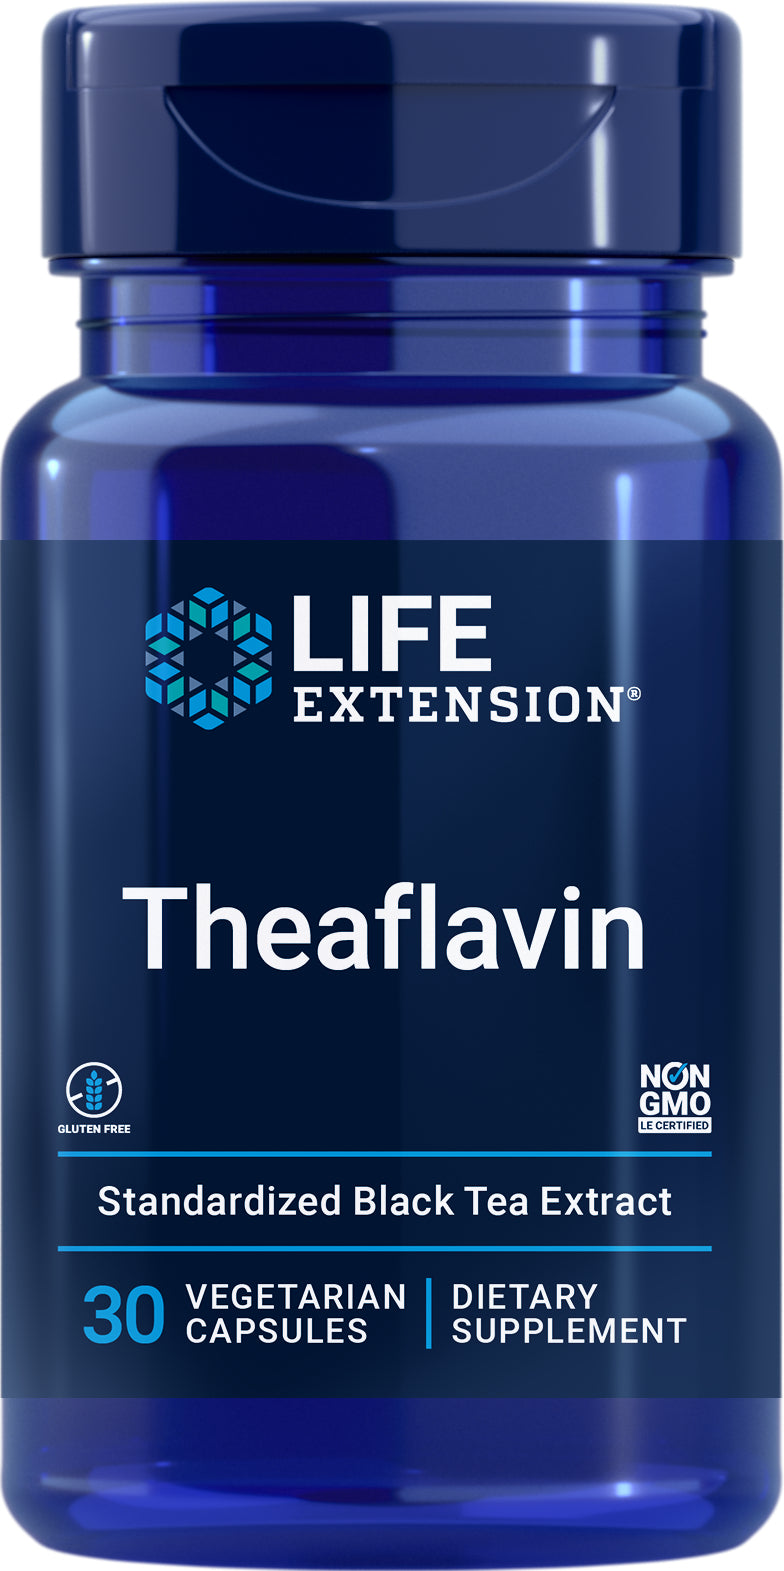 Theaflavin Standardized Extract 30 veg caps by Life Extension